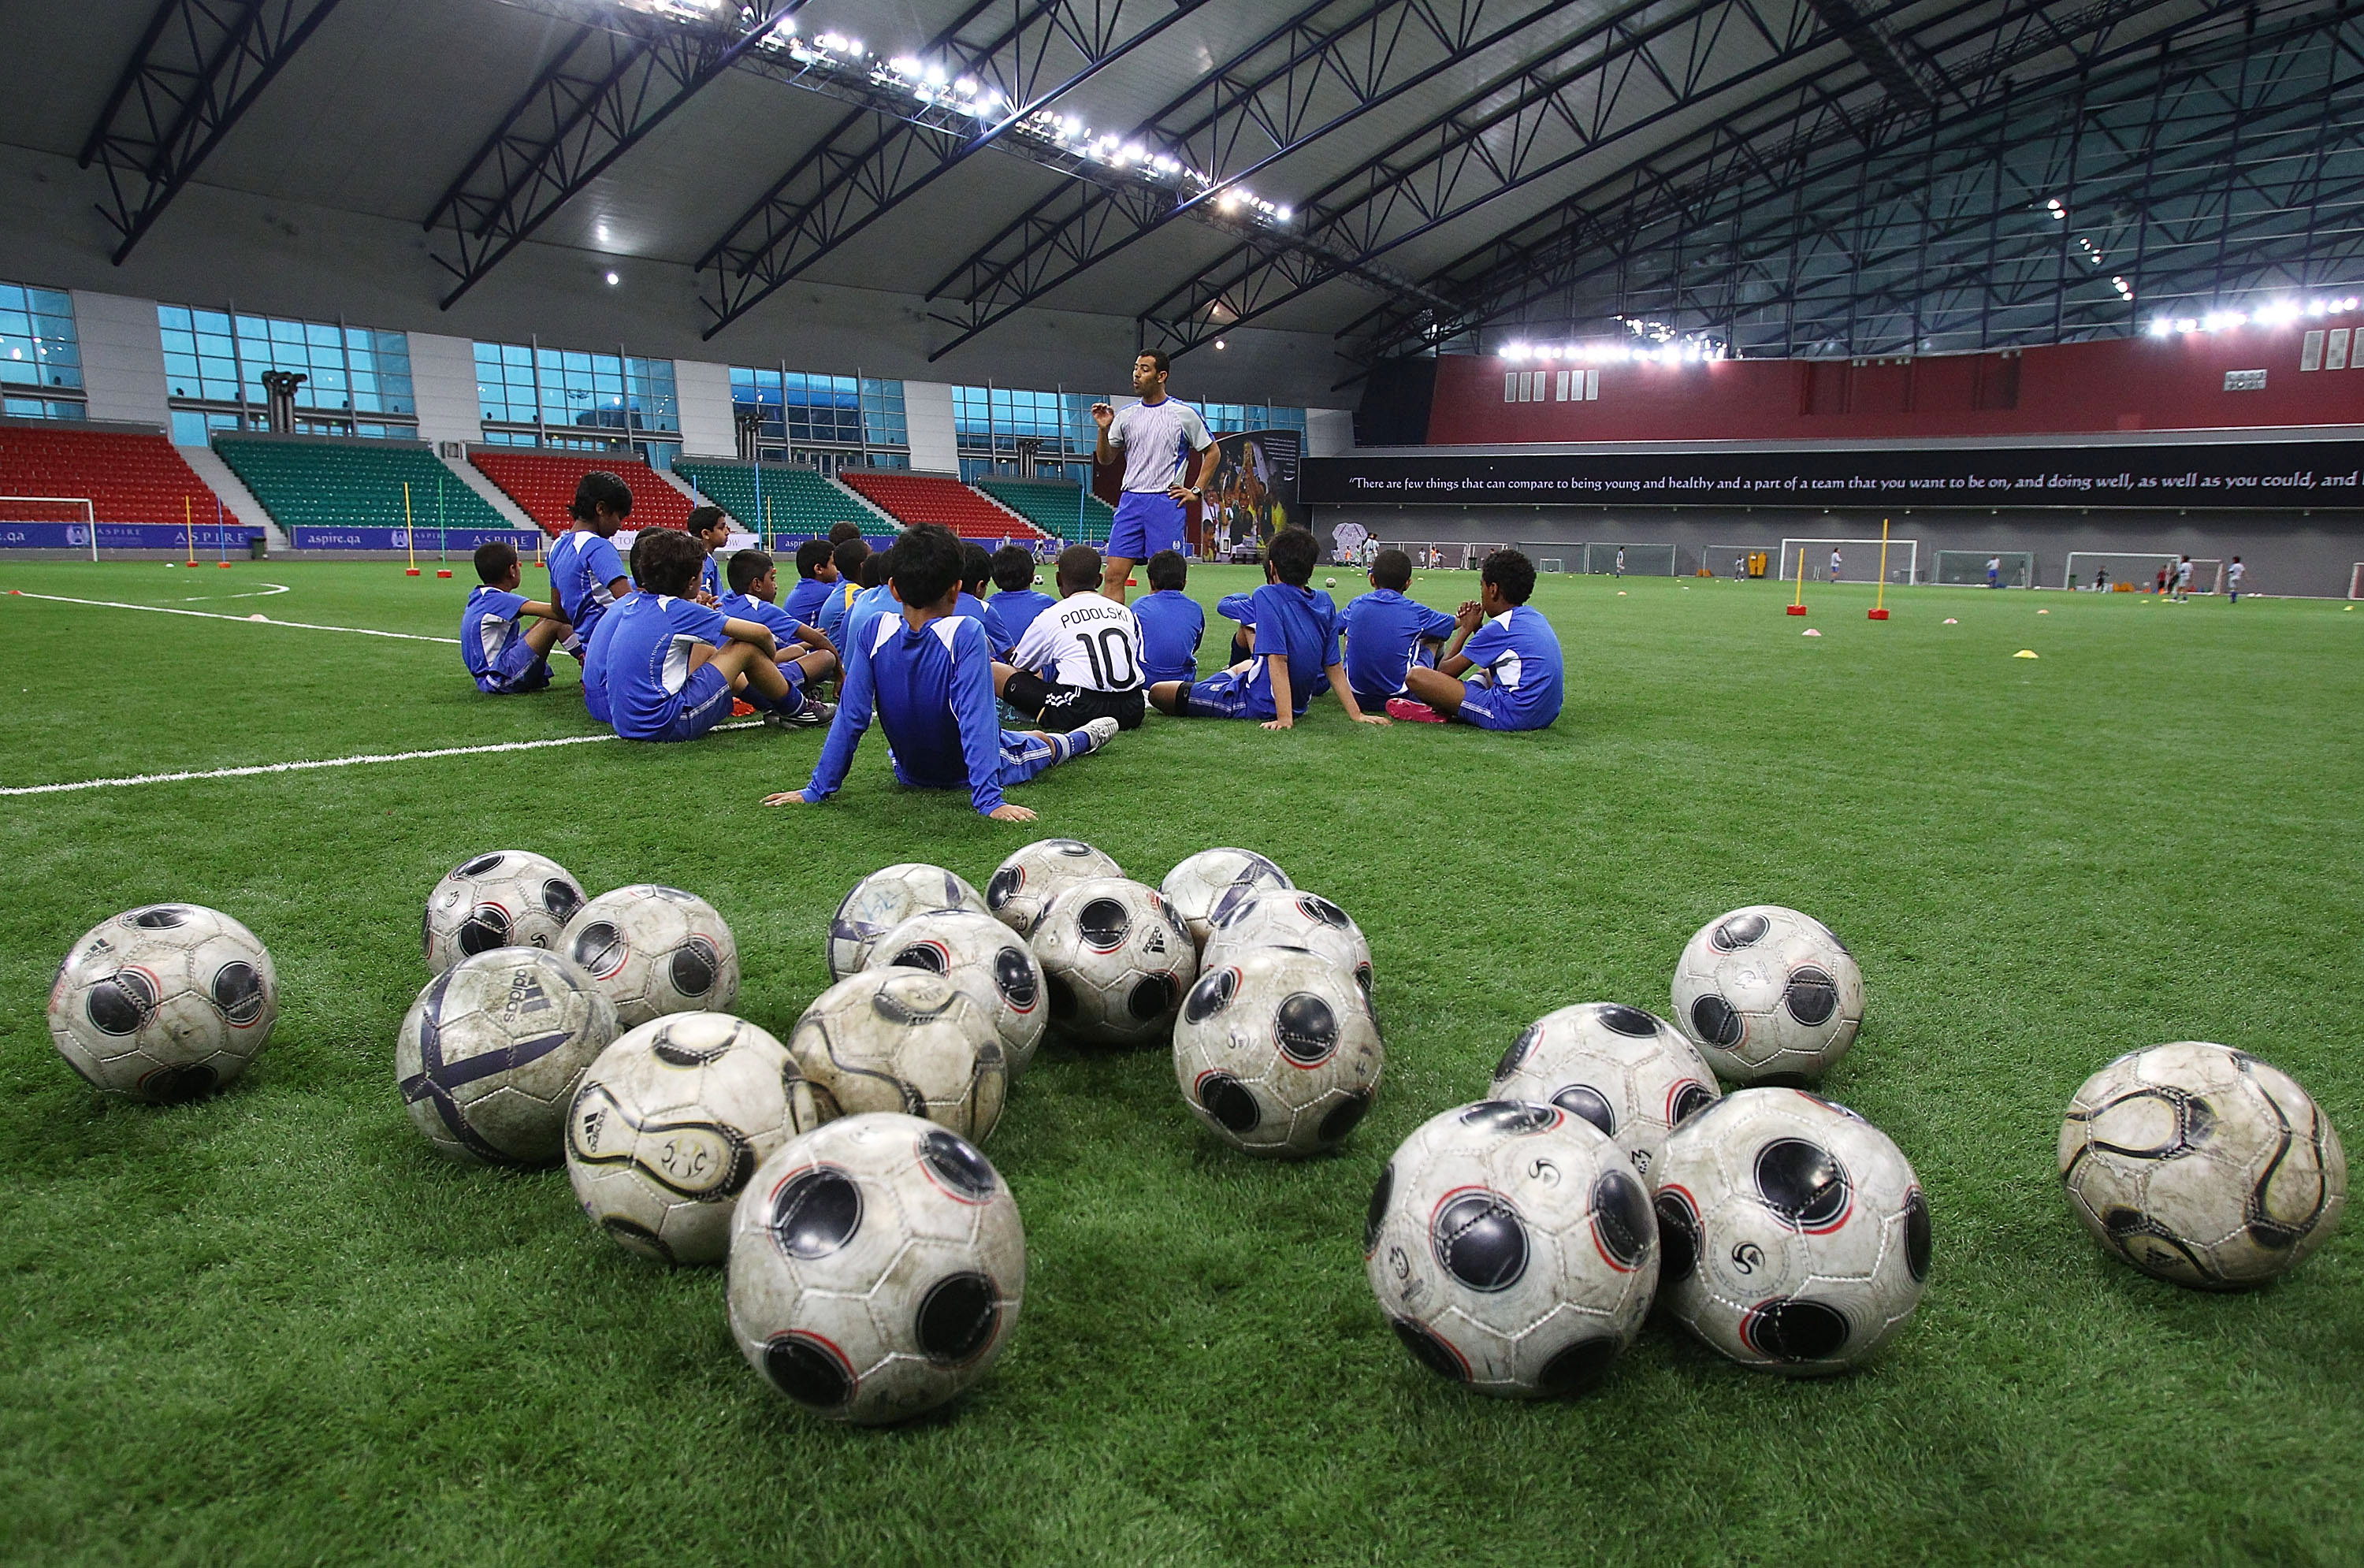 DOHA, QATAR - JANUARY 25:  Local children participate in a football training session at the ASPIRE Academy for Sports Excellence on January 25, 2011 in Doha, Qatar.  (Photo by Robert Cianflone/Getty Images)